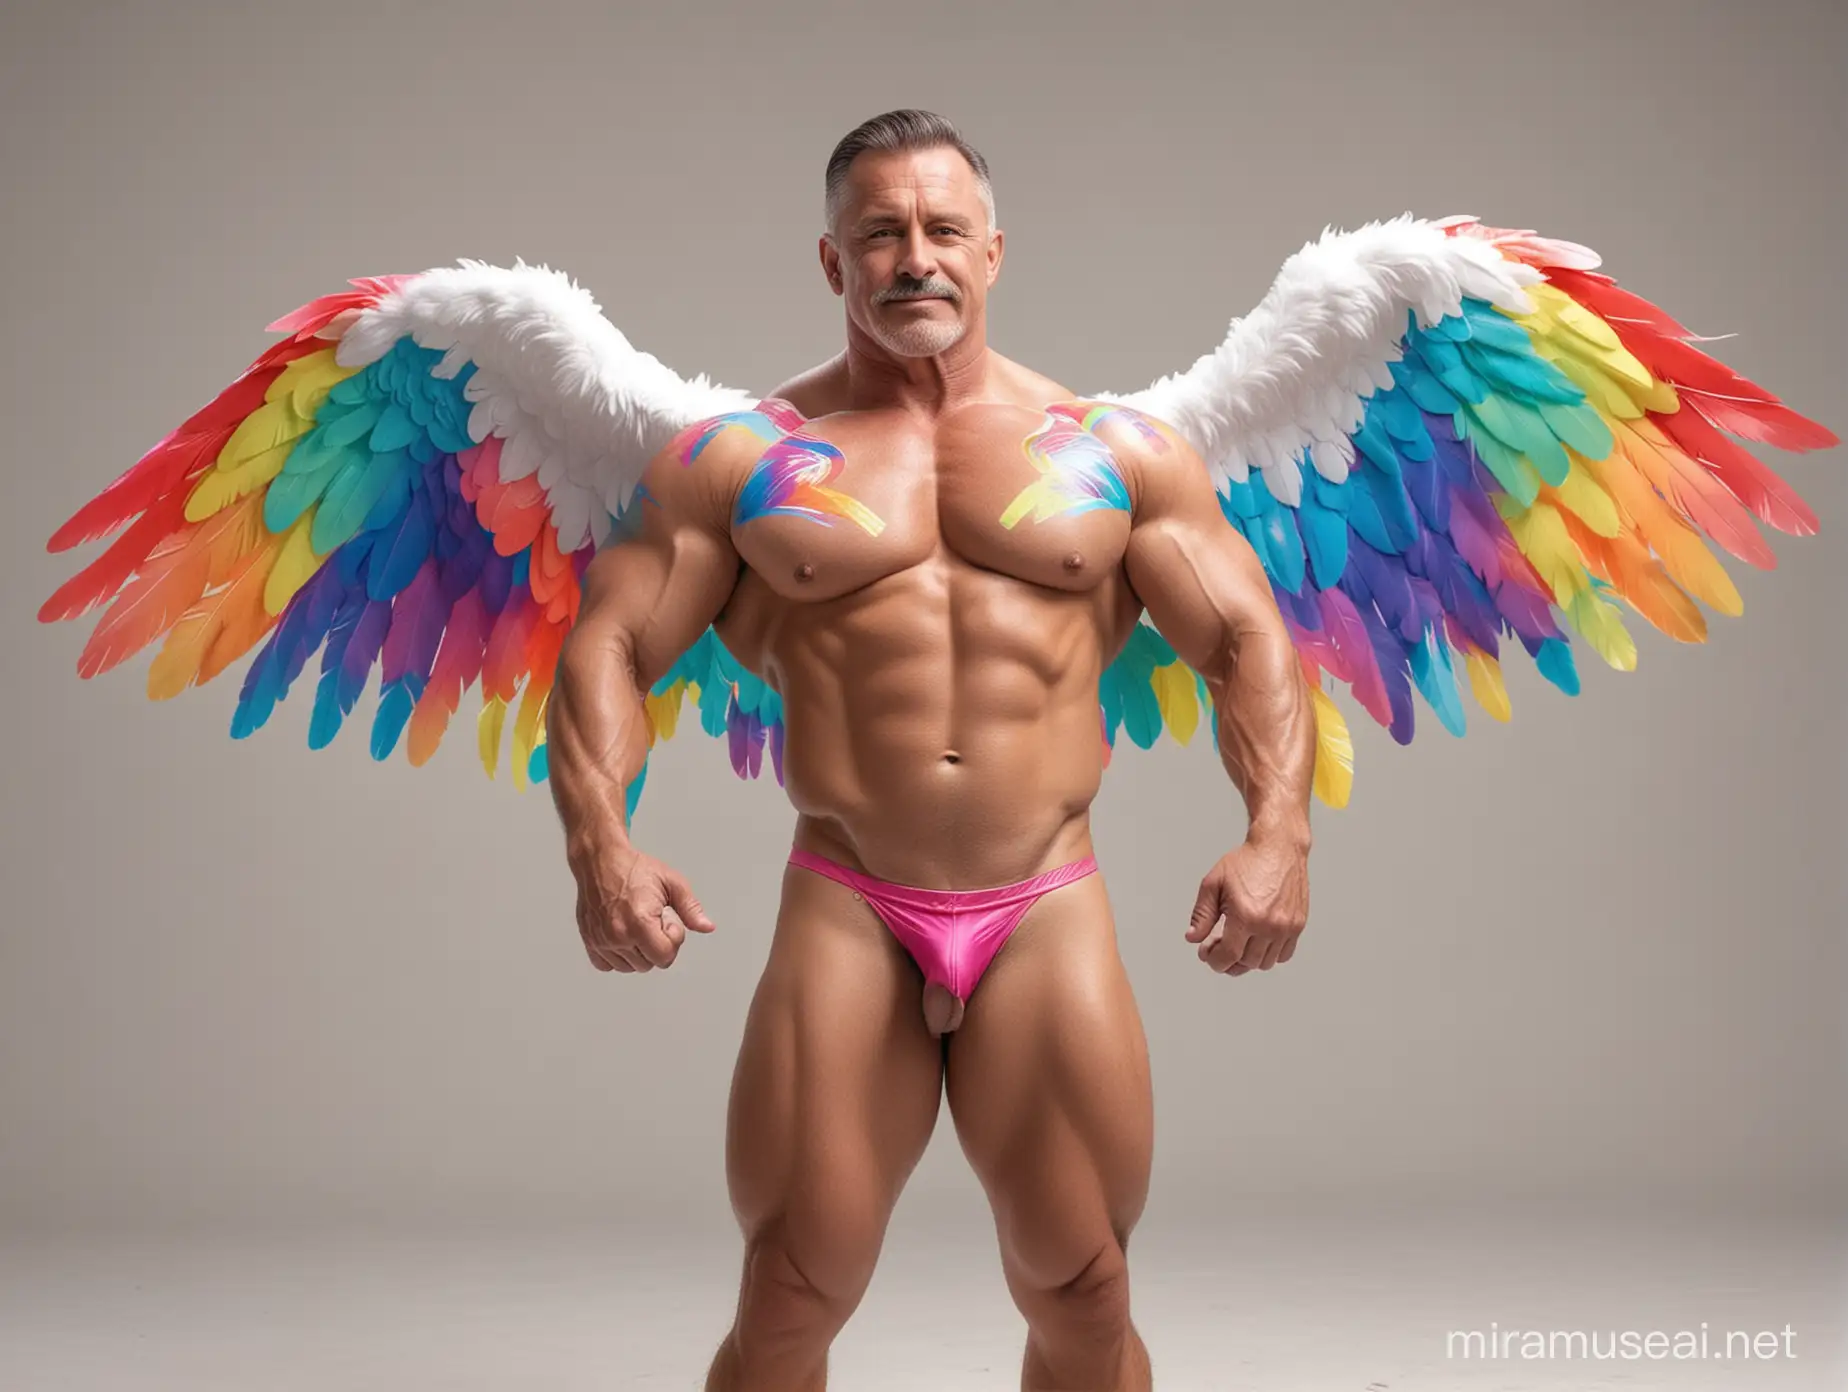 Topless 40s Ultra Chunky Bodybuilder Daddy Wearing Multi-Highlighter Bright Rainbow Colored See Through Eagle Wings Shoulder Jacket short shorts Flexing Big Strong Arm with Doraemon